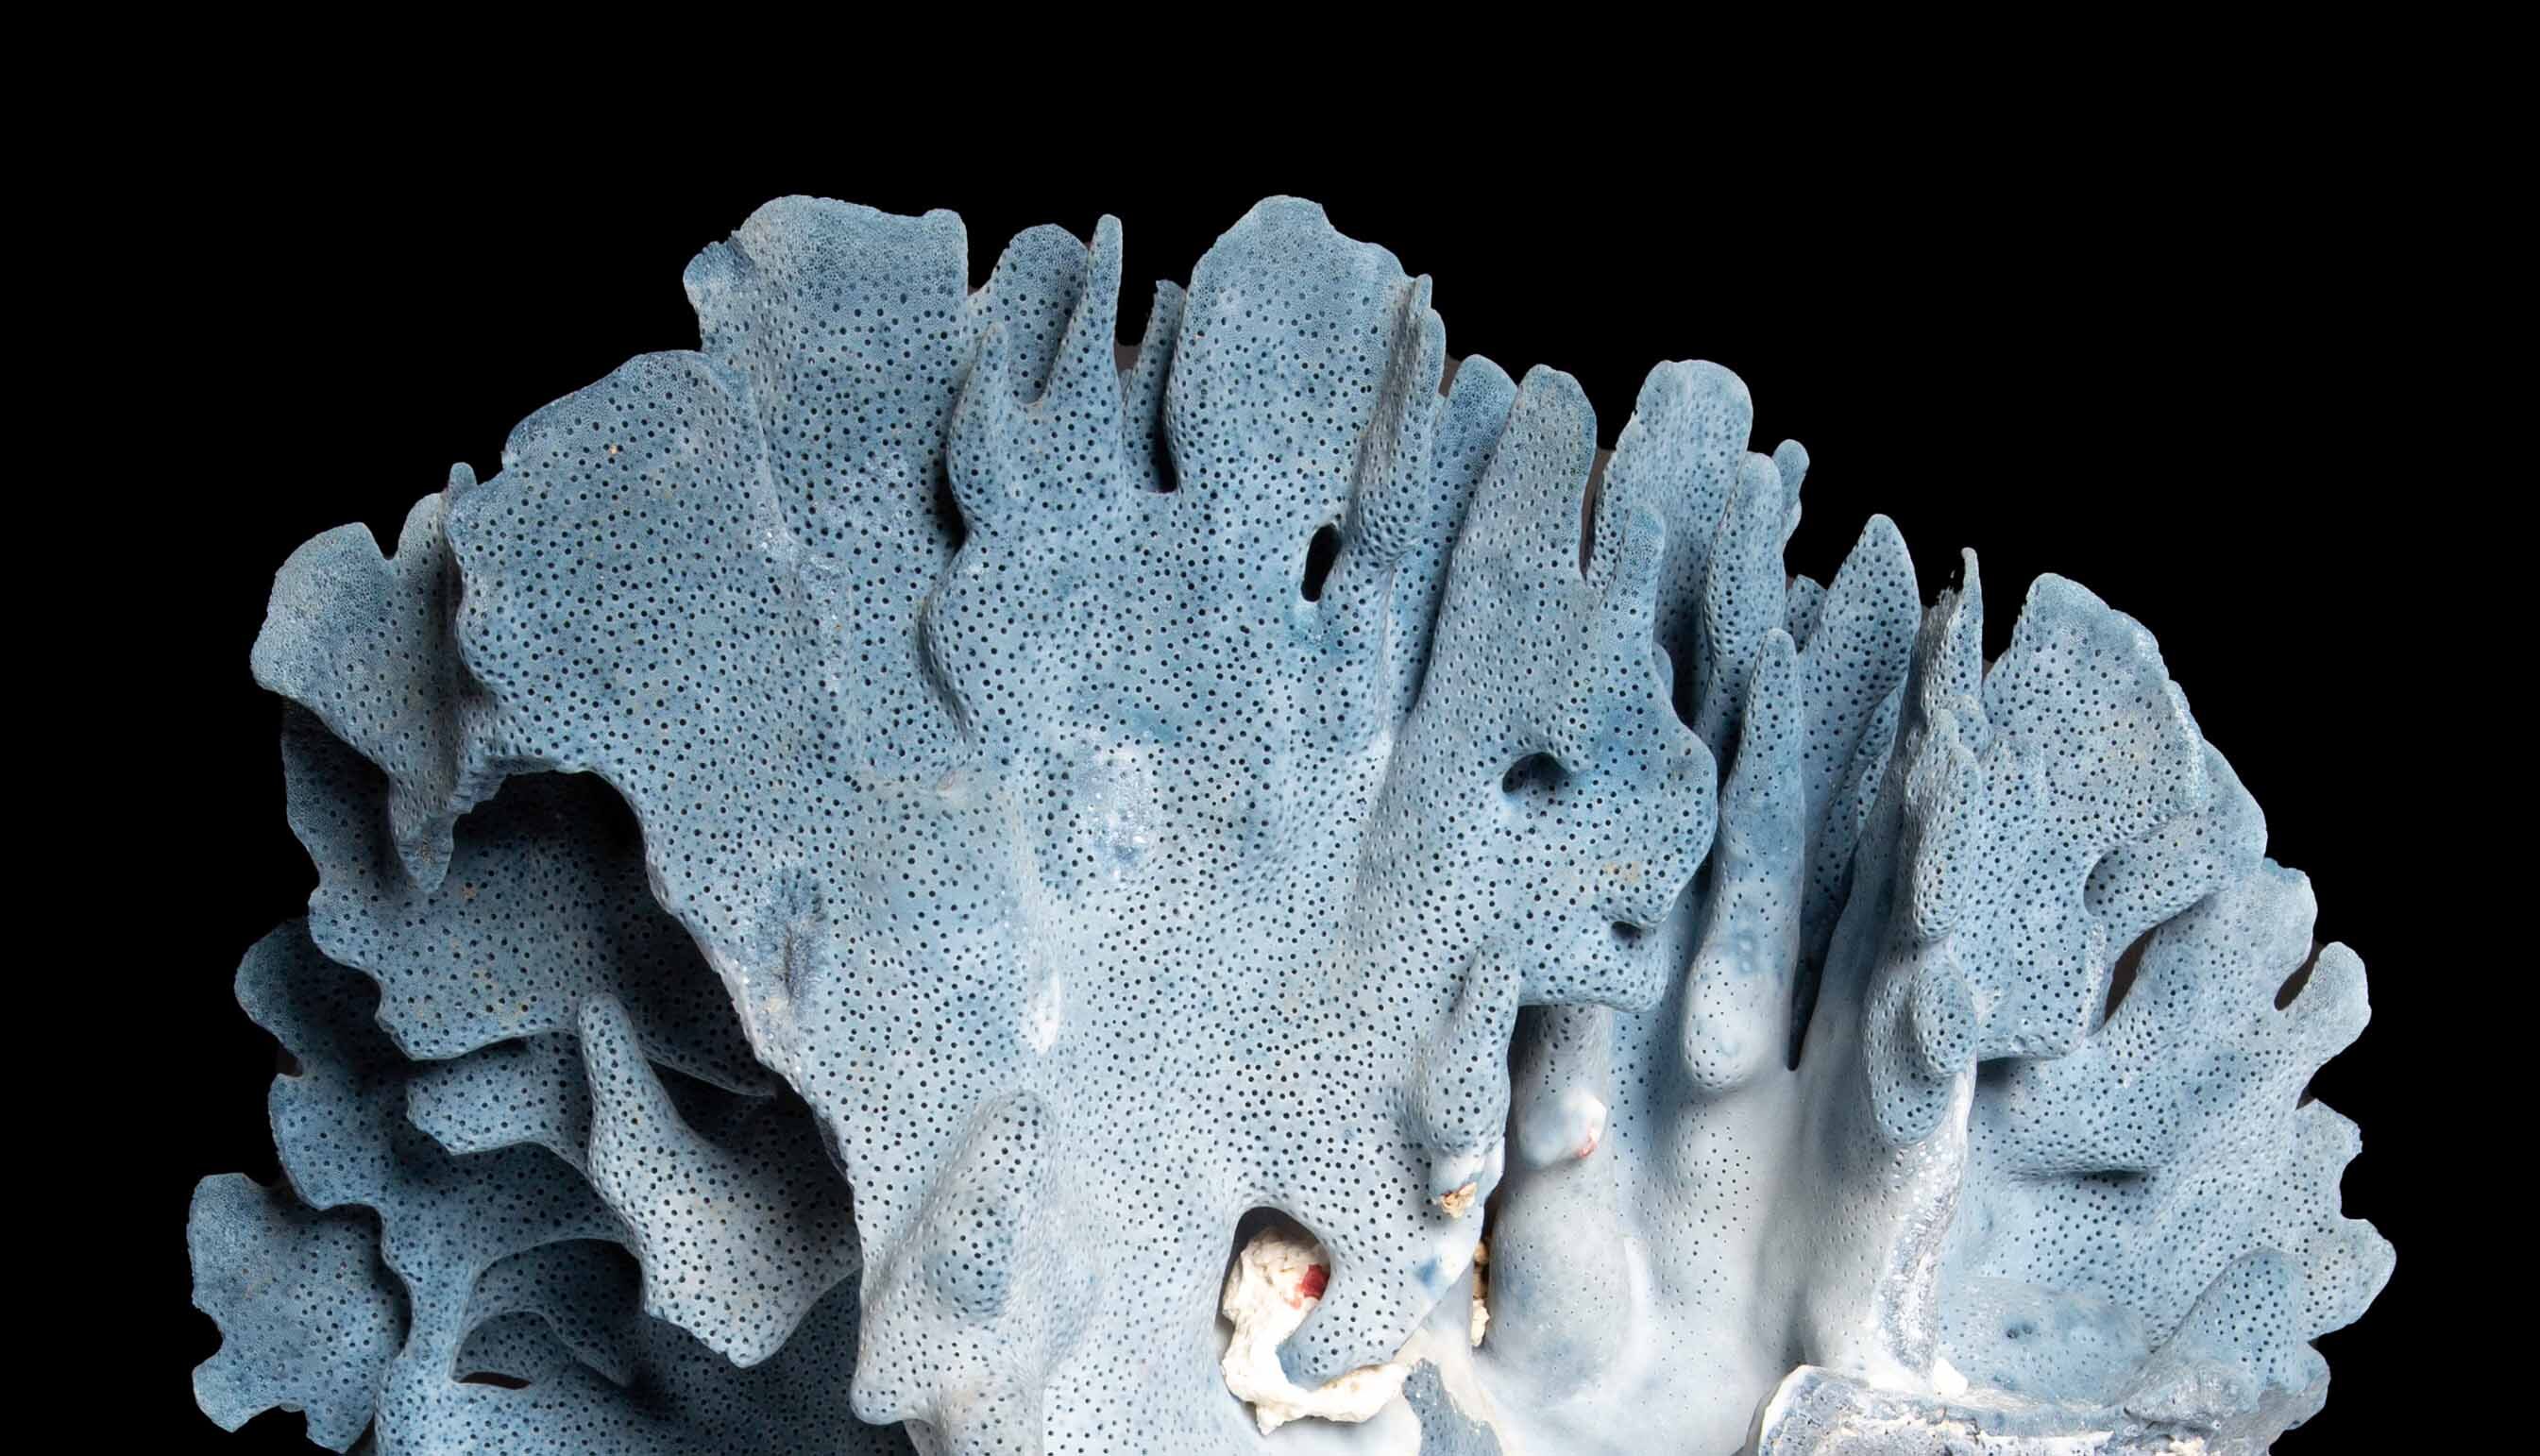 Mounted Blue Coral